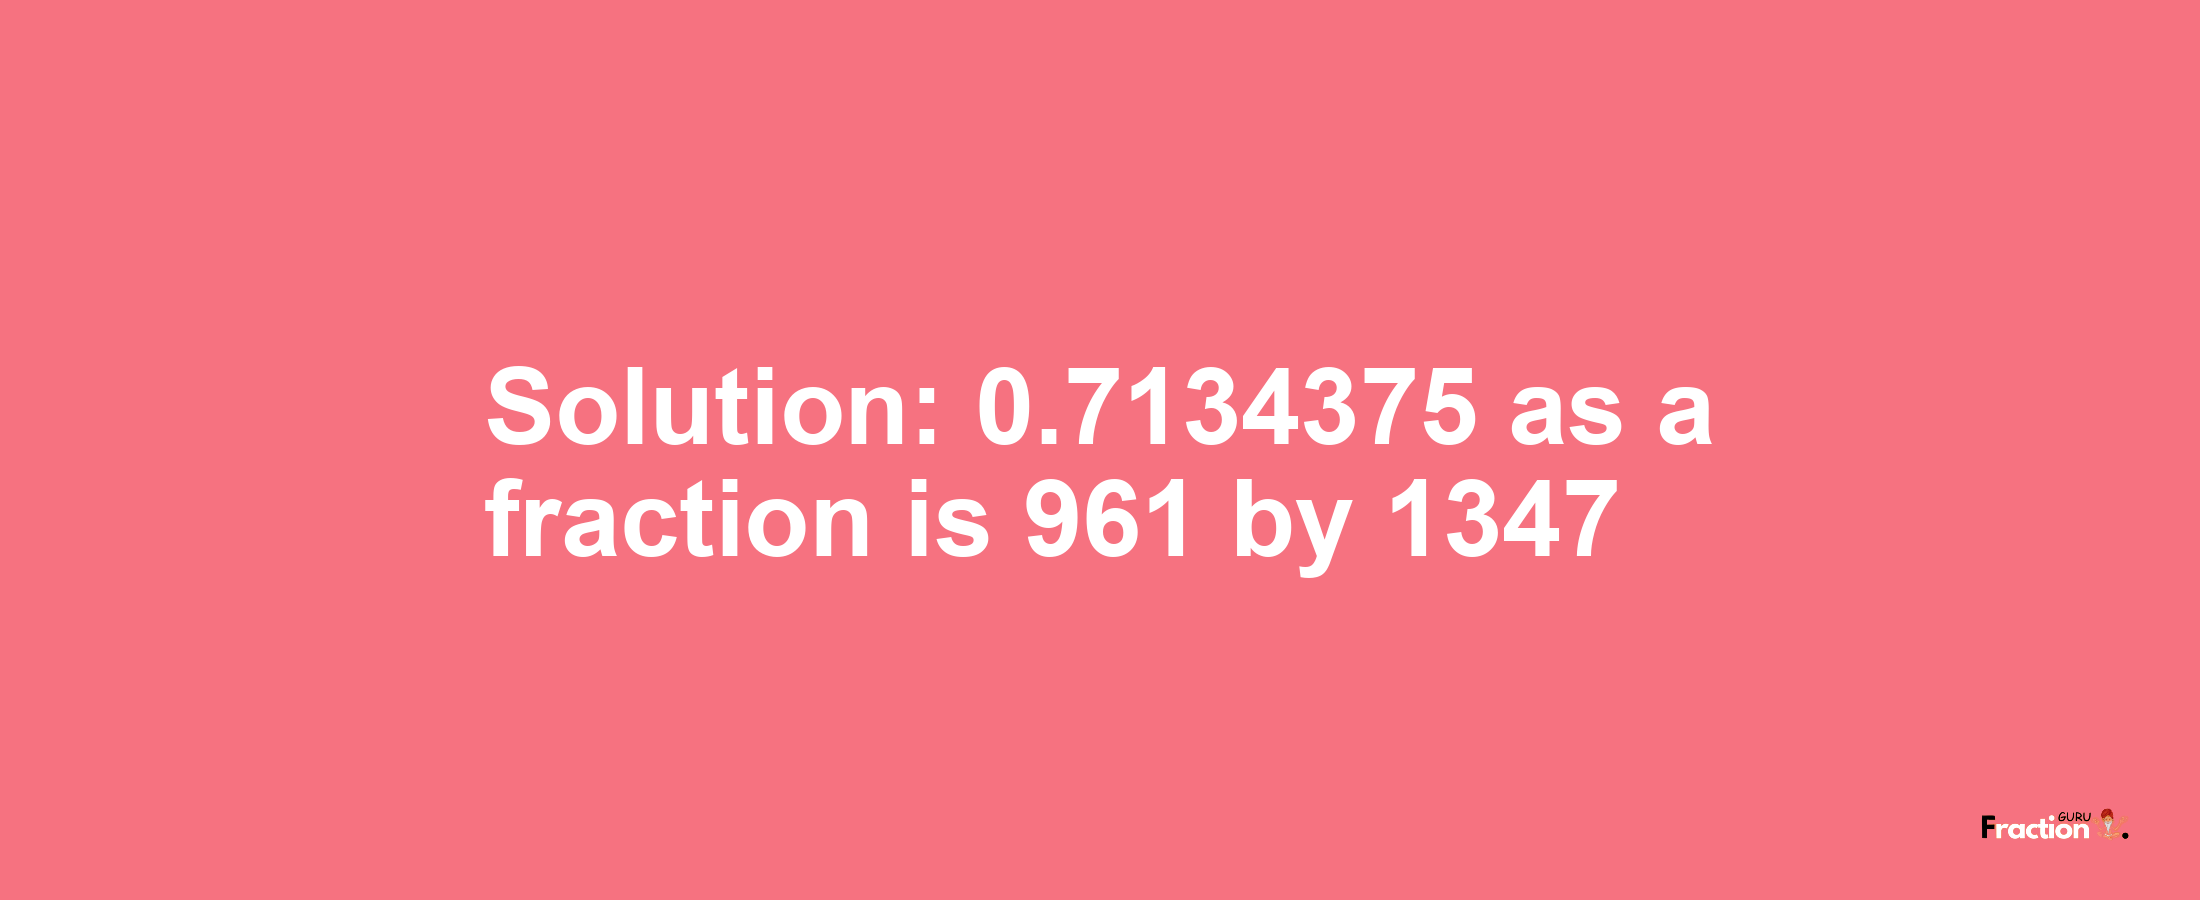 Solution:0.7134375 as a fraction is 961/1347